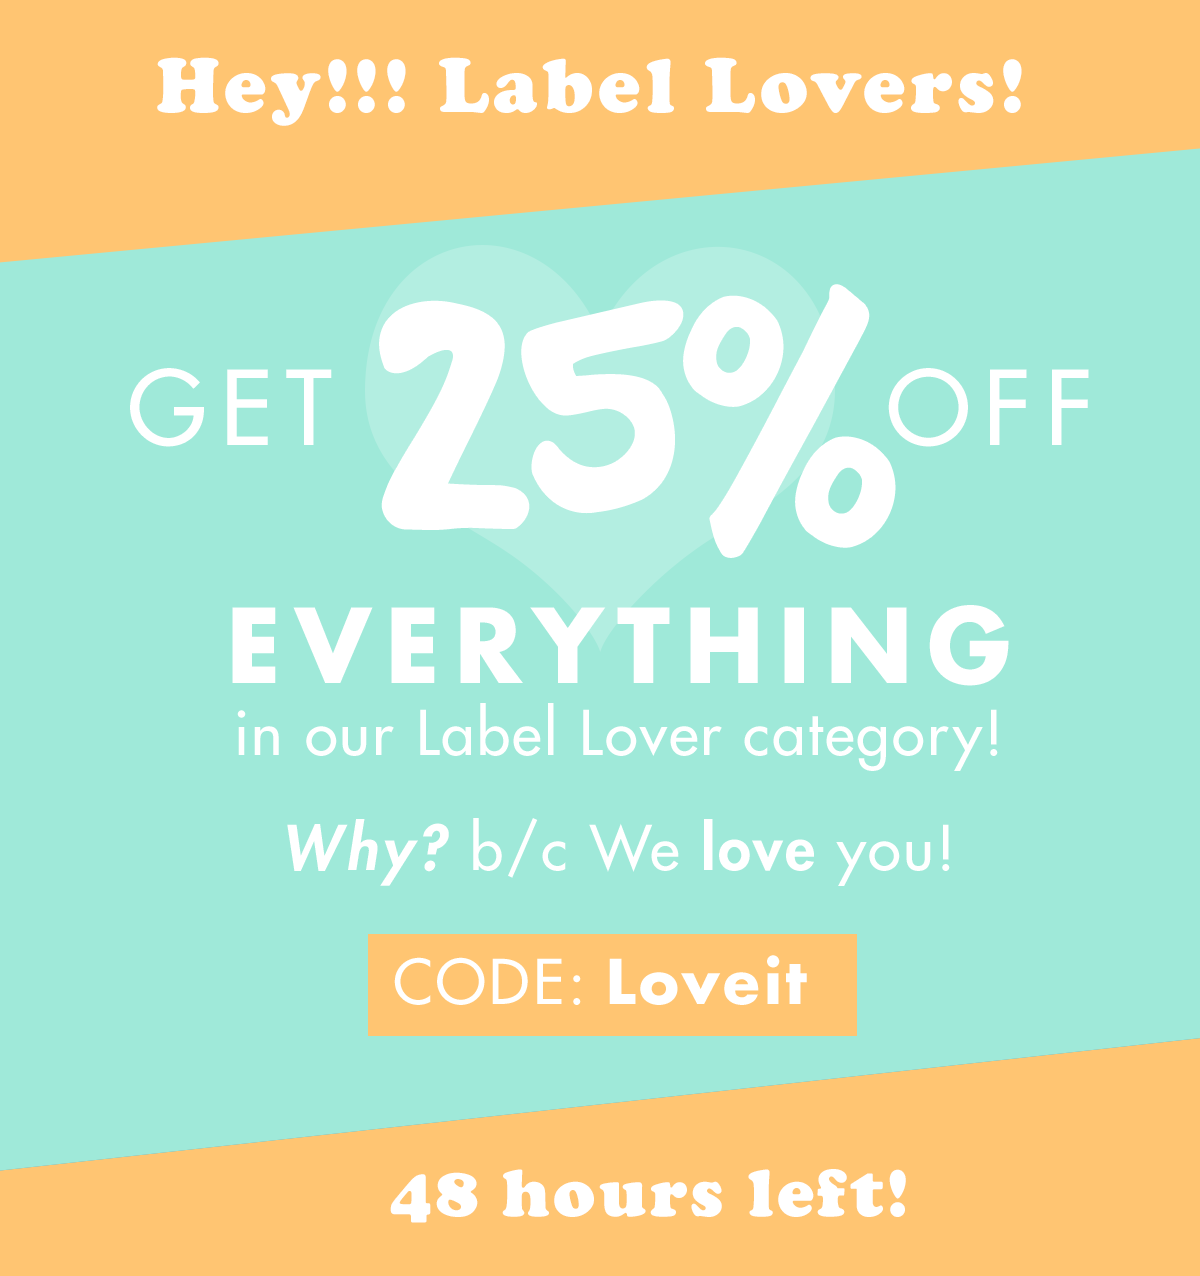 Get 25% off Our Label Love category! Use Code: LOVEIT, Ends Soon